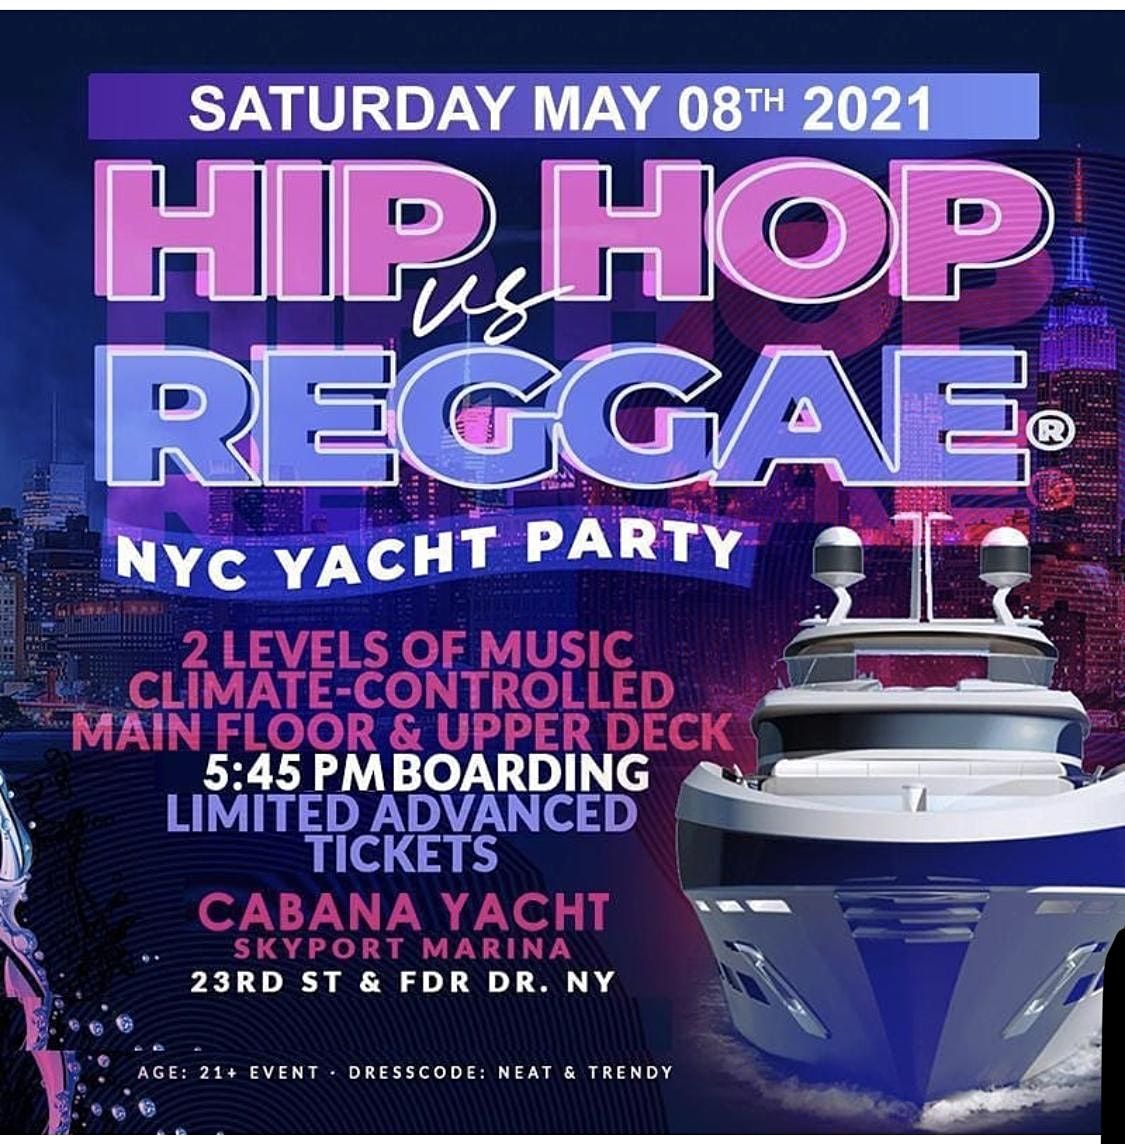 MIDNIGHT YACHT PARTY NYC!  Sat., June 26th